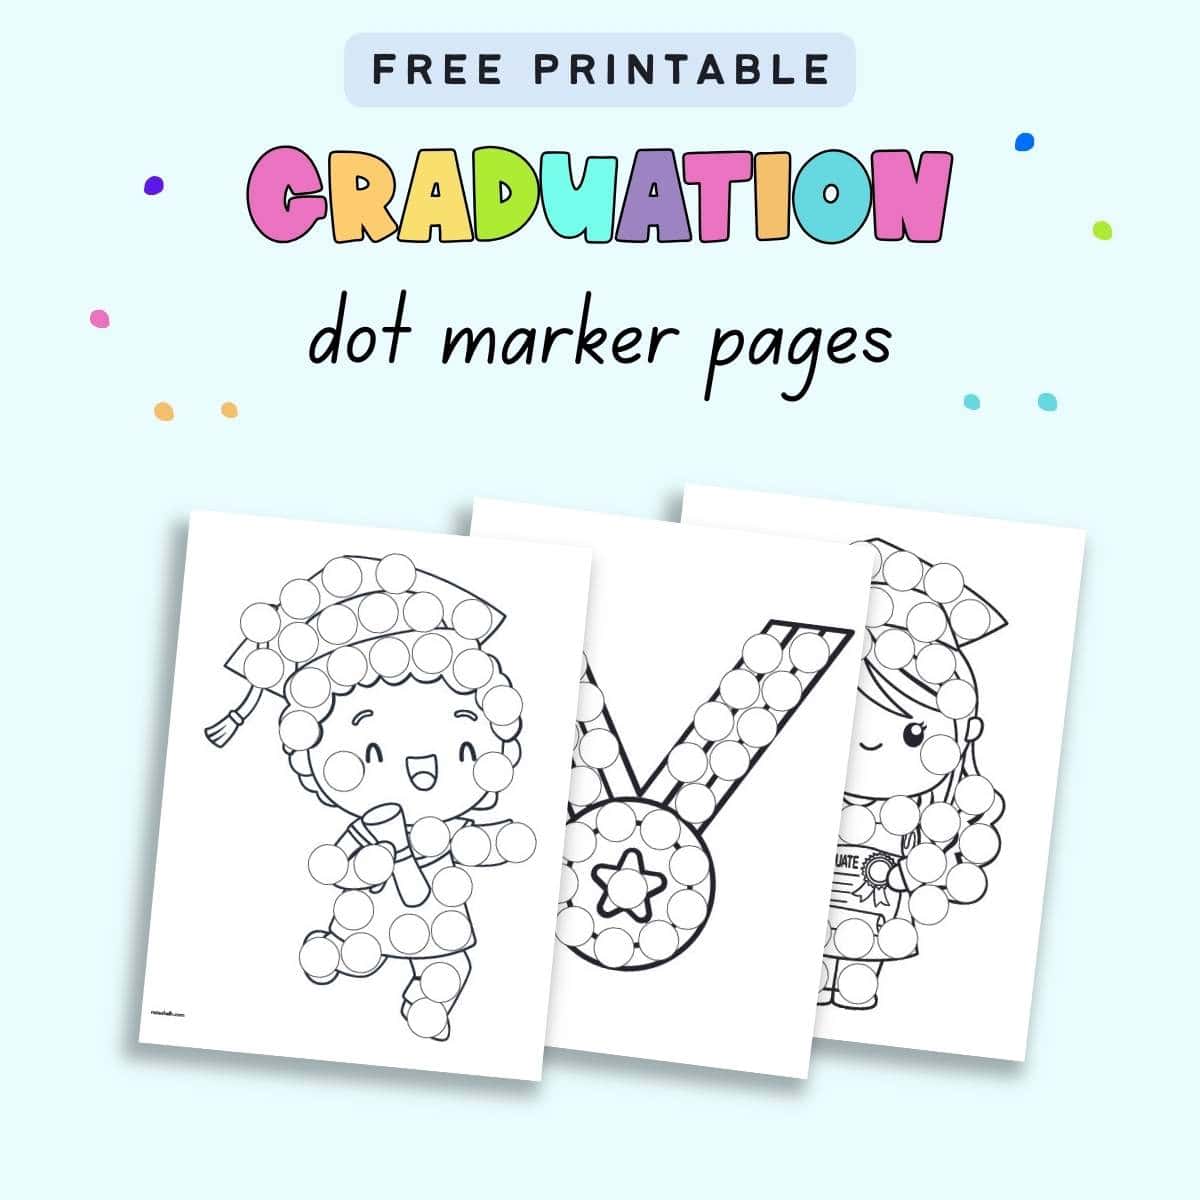 Text "free printable graduation dot marker pages" with a  preview of three preschool.kindergarten themed graduation coloring pages